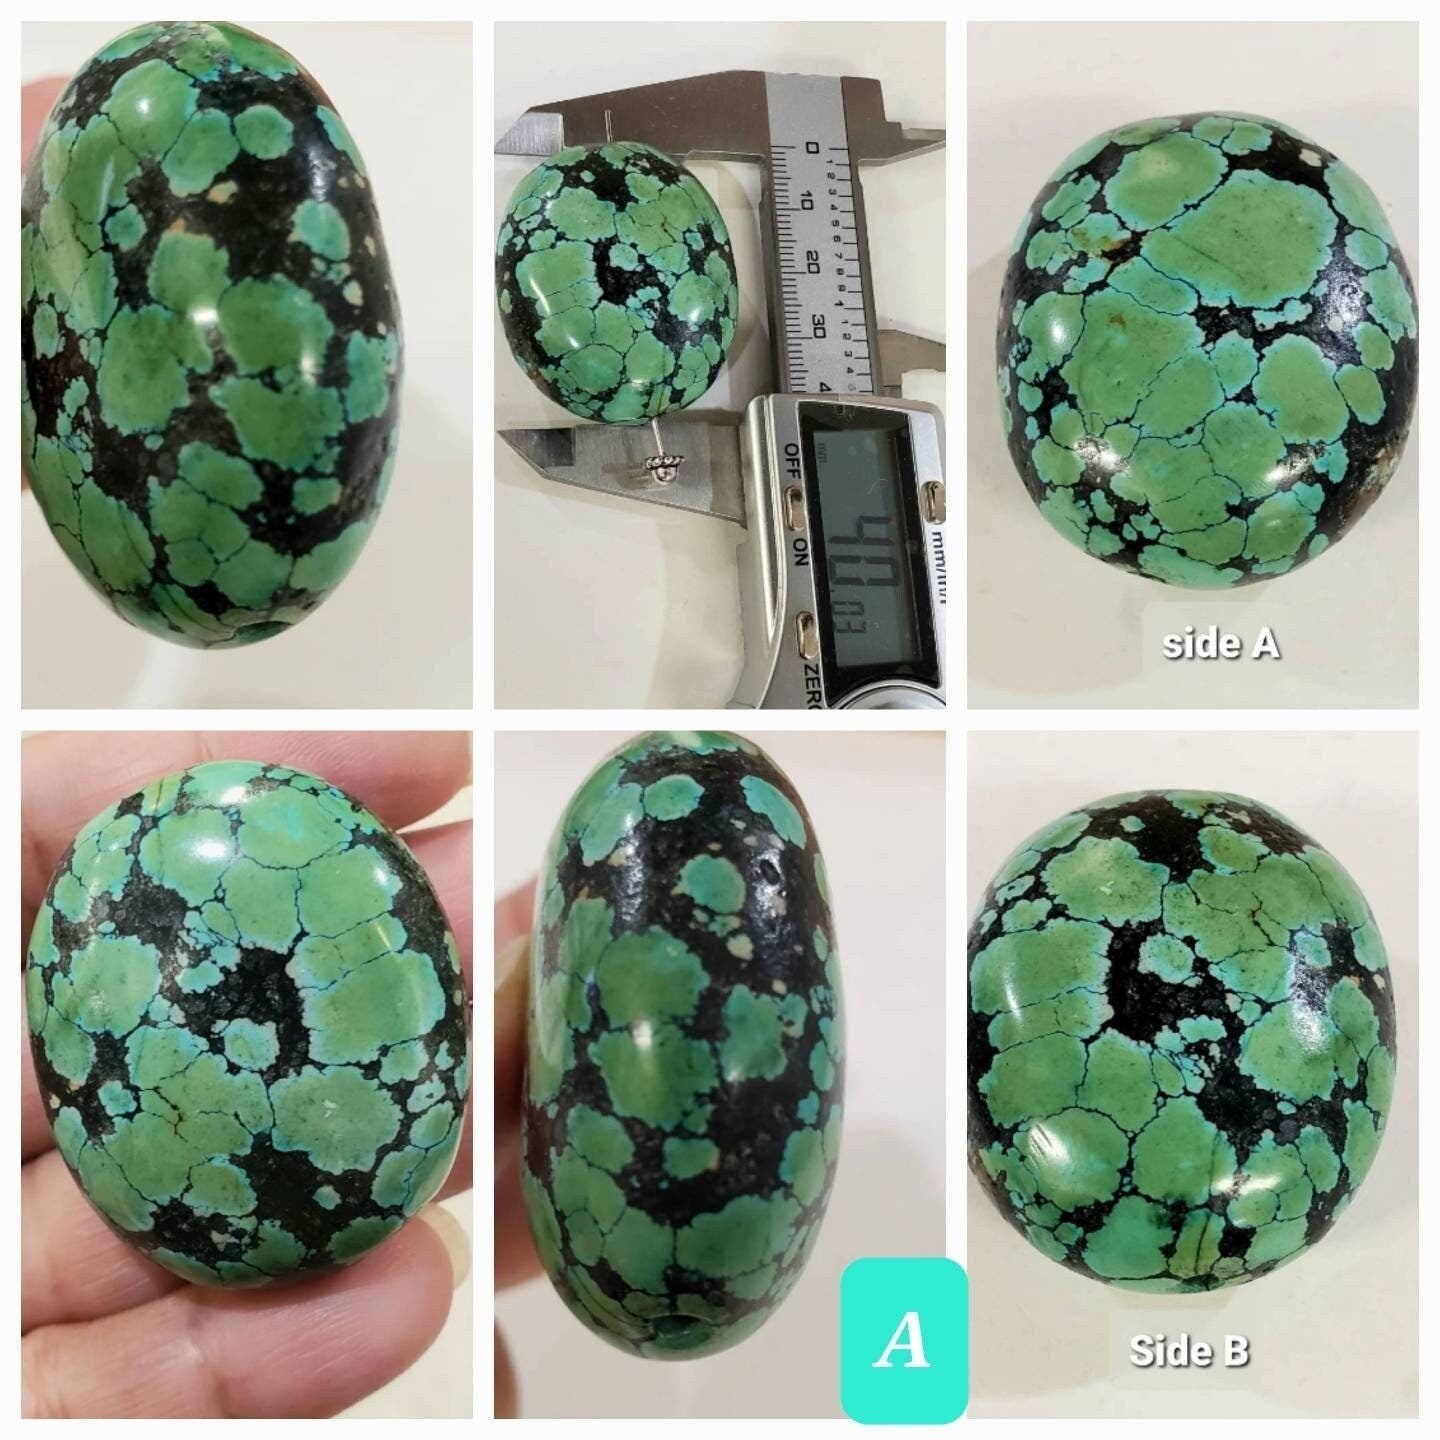 Turquoise Pebble, AAA Tibetan Spiderweb Blue-Greenish Turquoise Pebble ,Rare, Jewelry Focal, Pendant, Palm Stone or Collection Healing Gem